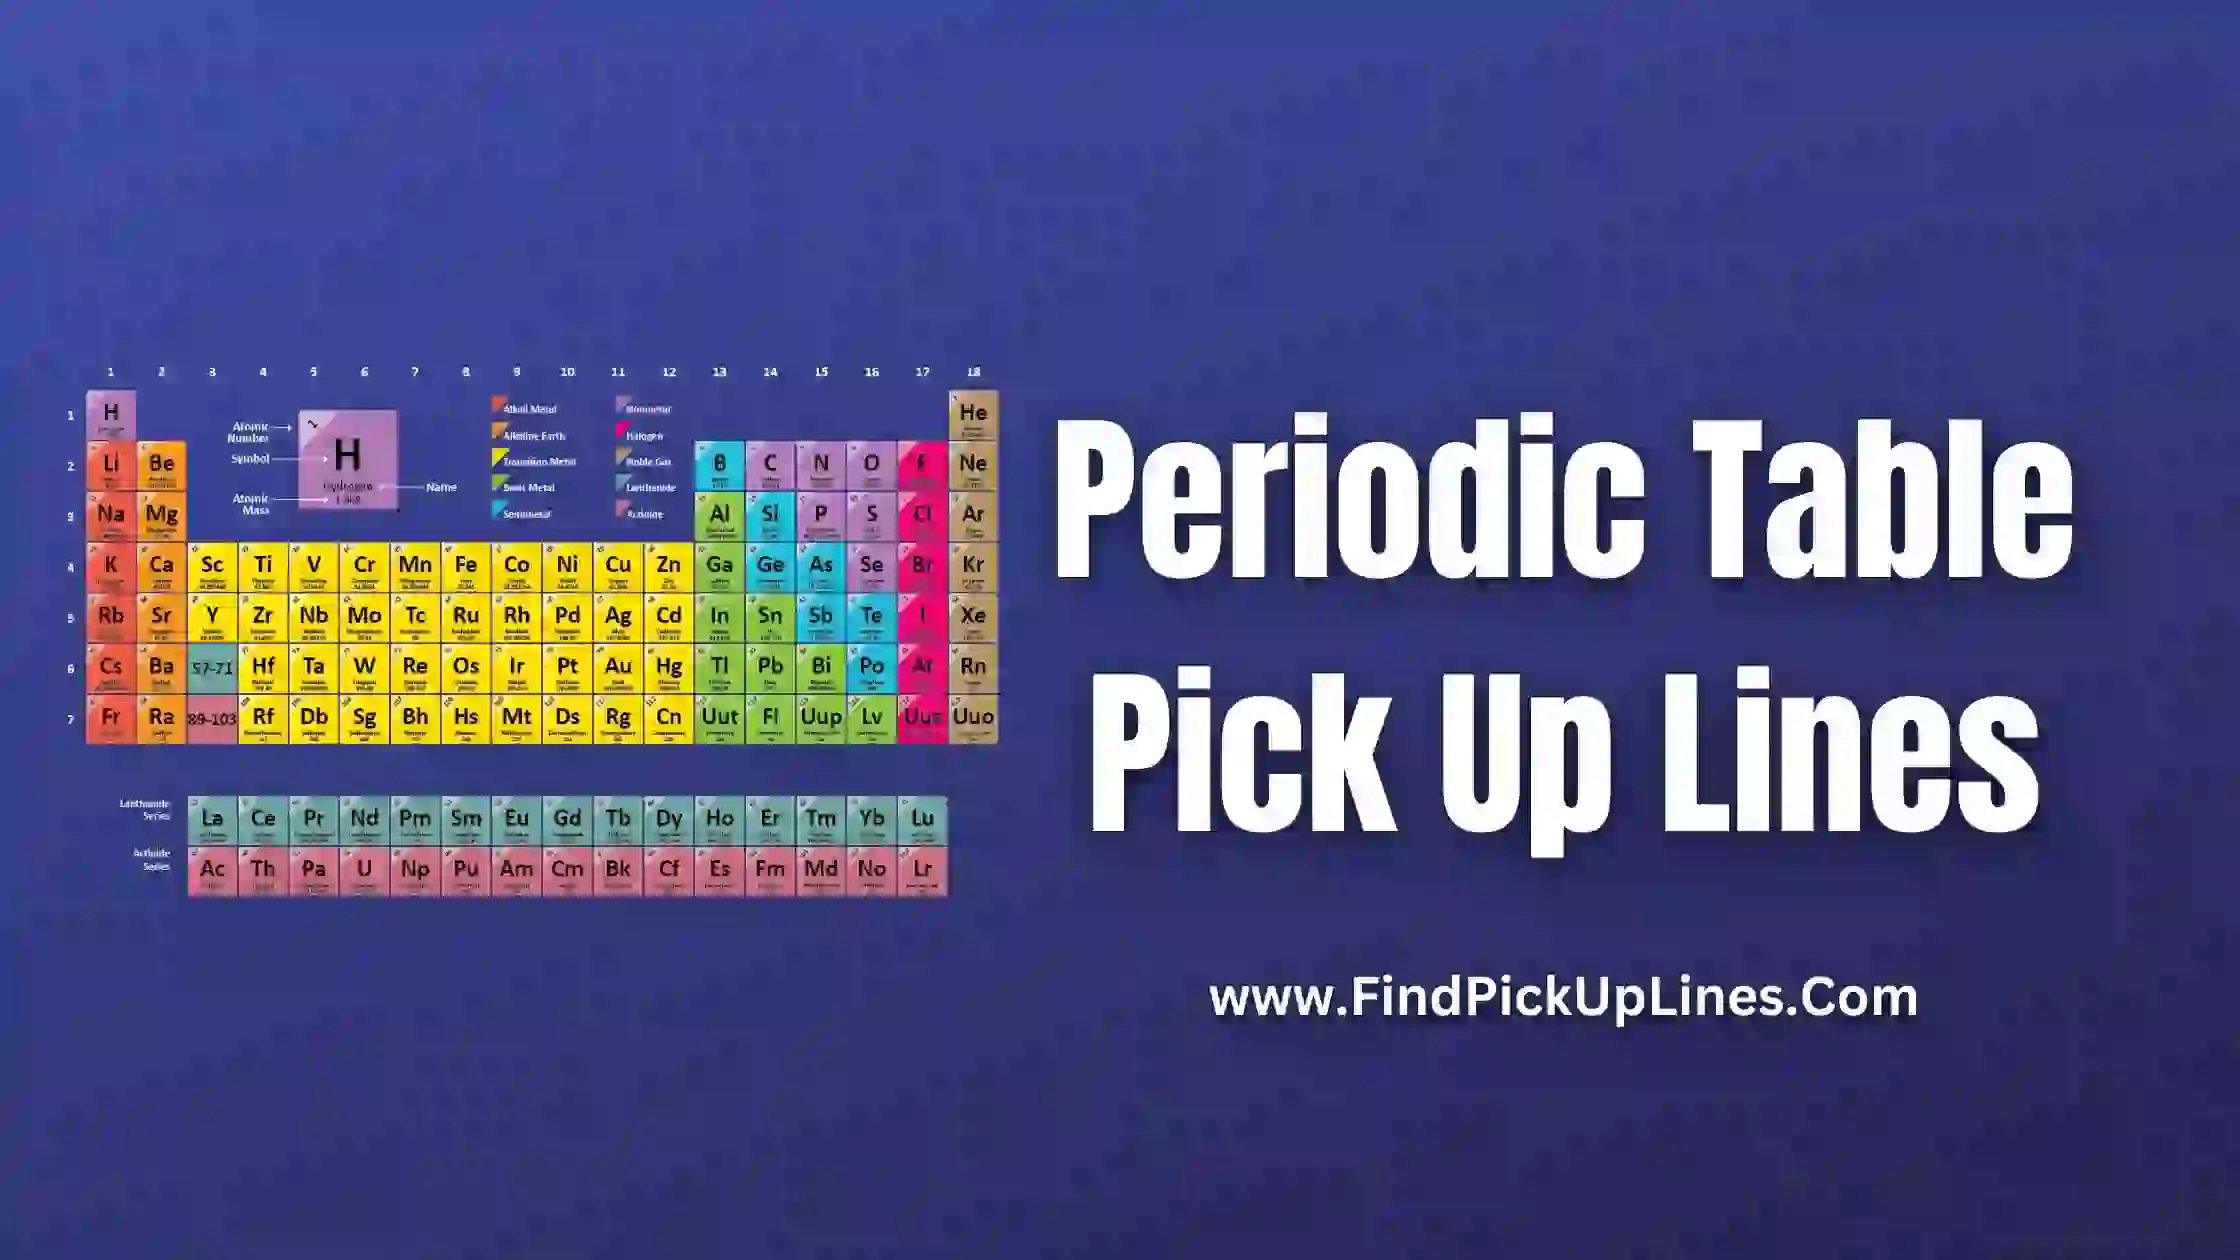 Periodic Table Pick Up Lines